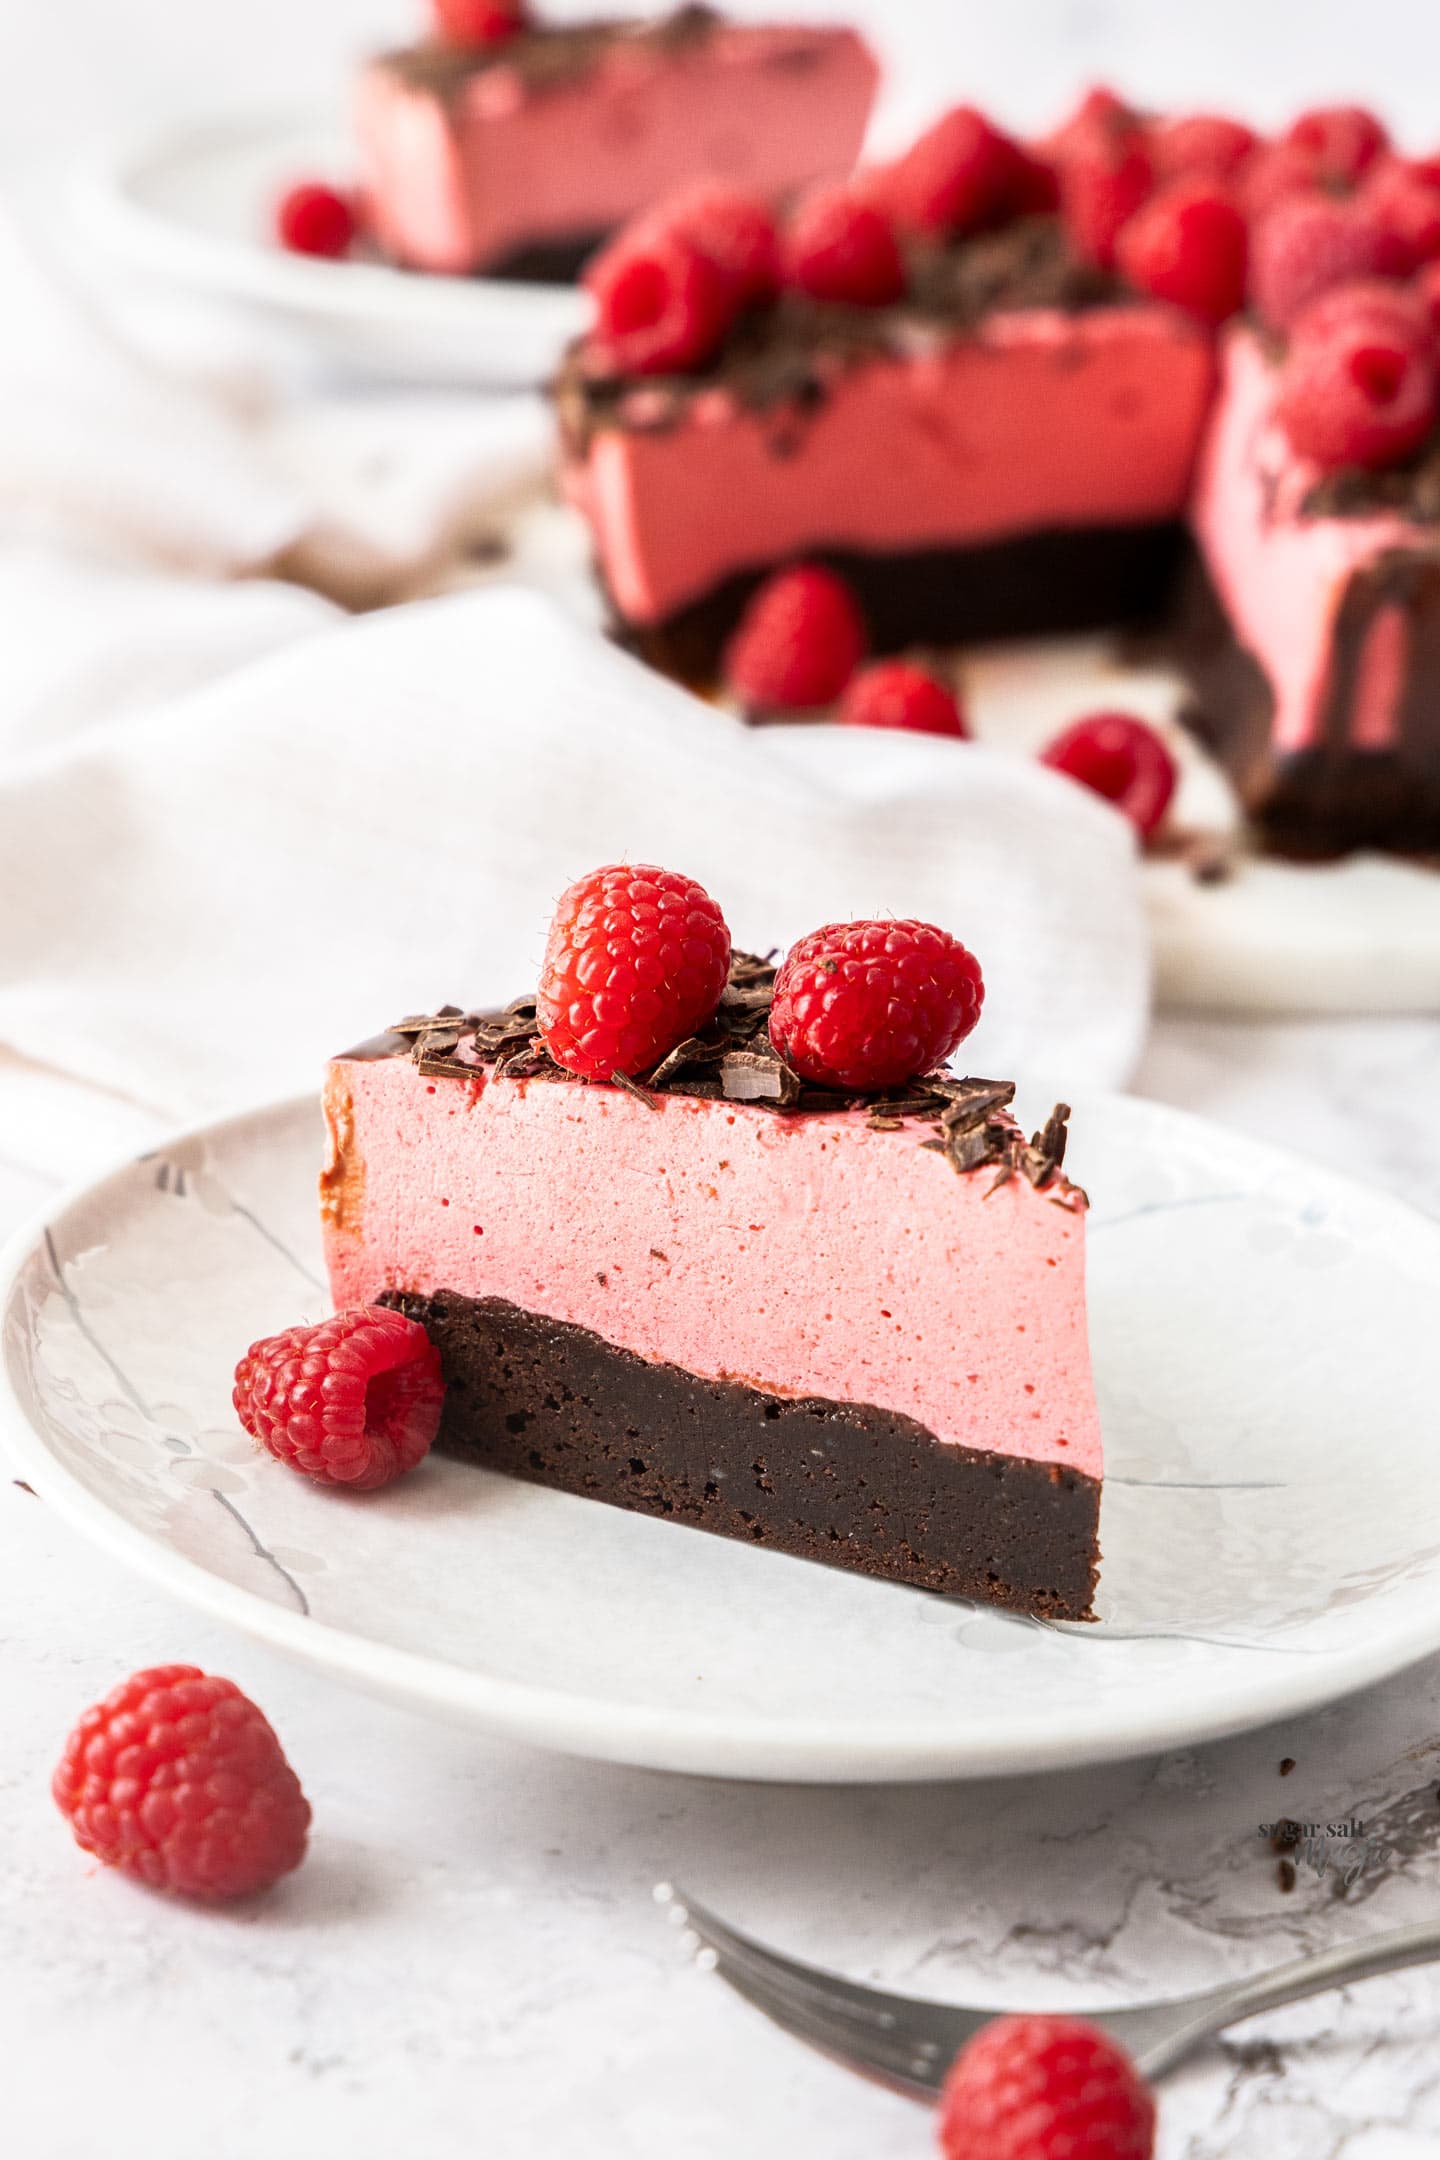 A slice of raspberry mousse cake on a dessert plate.